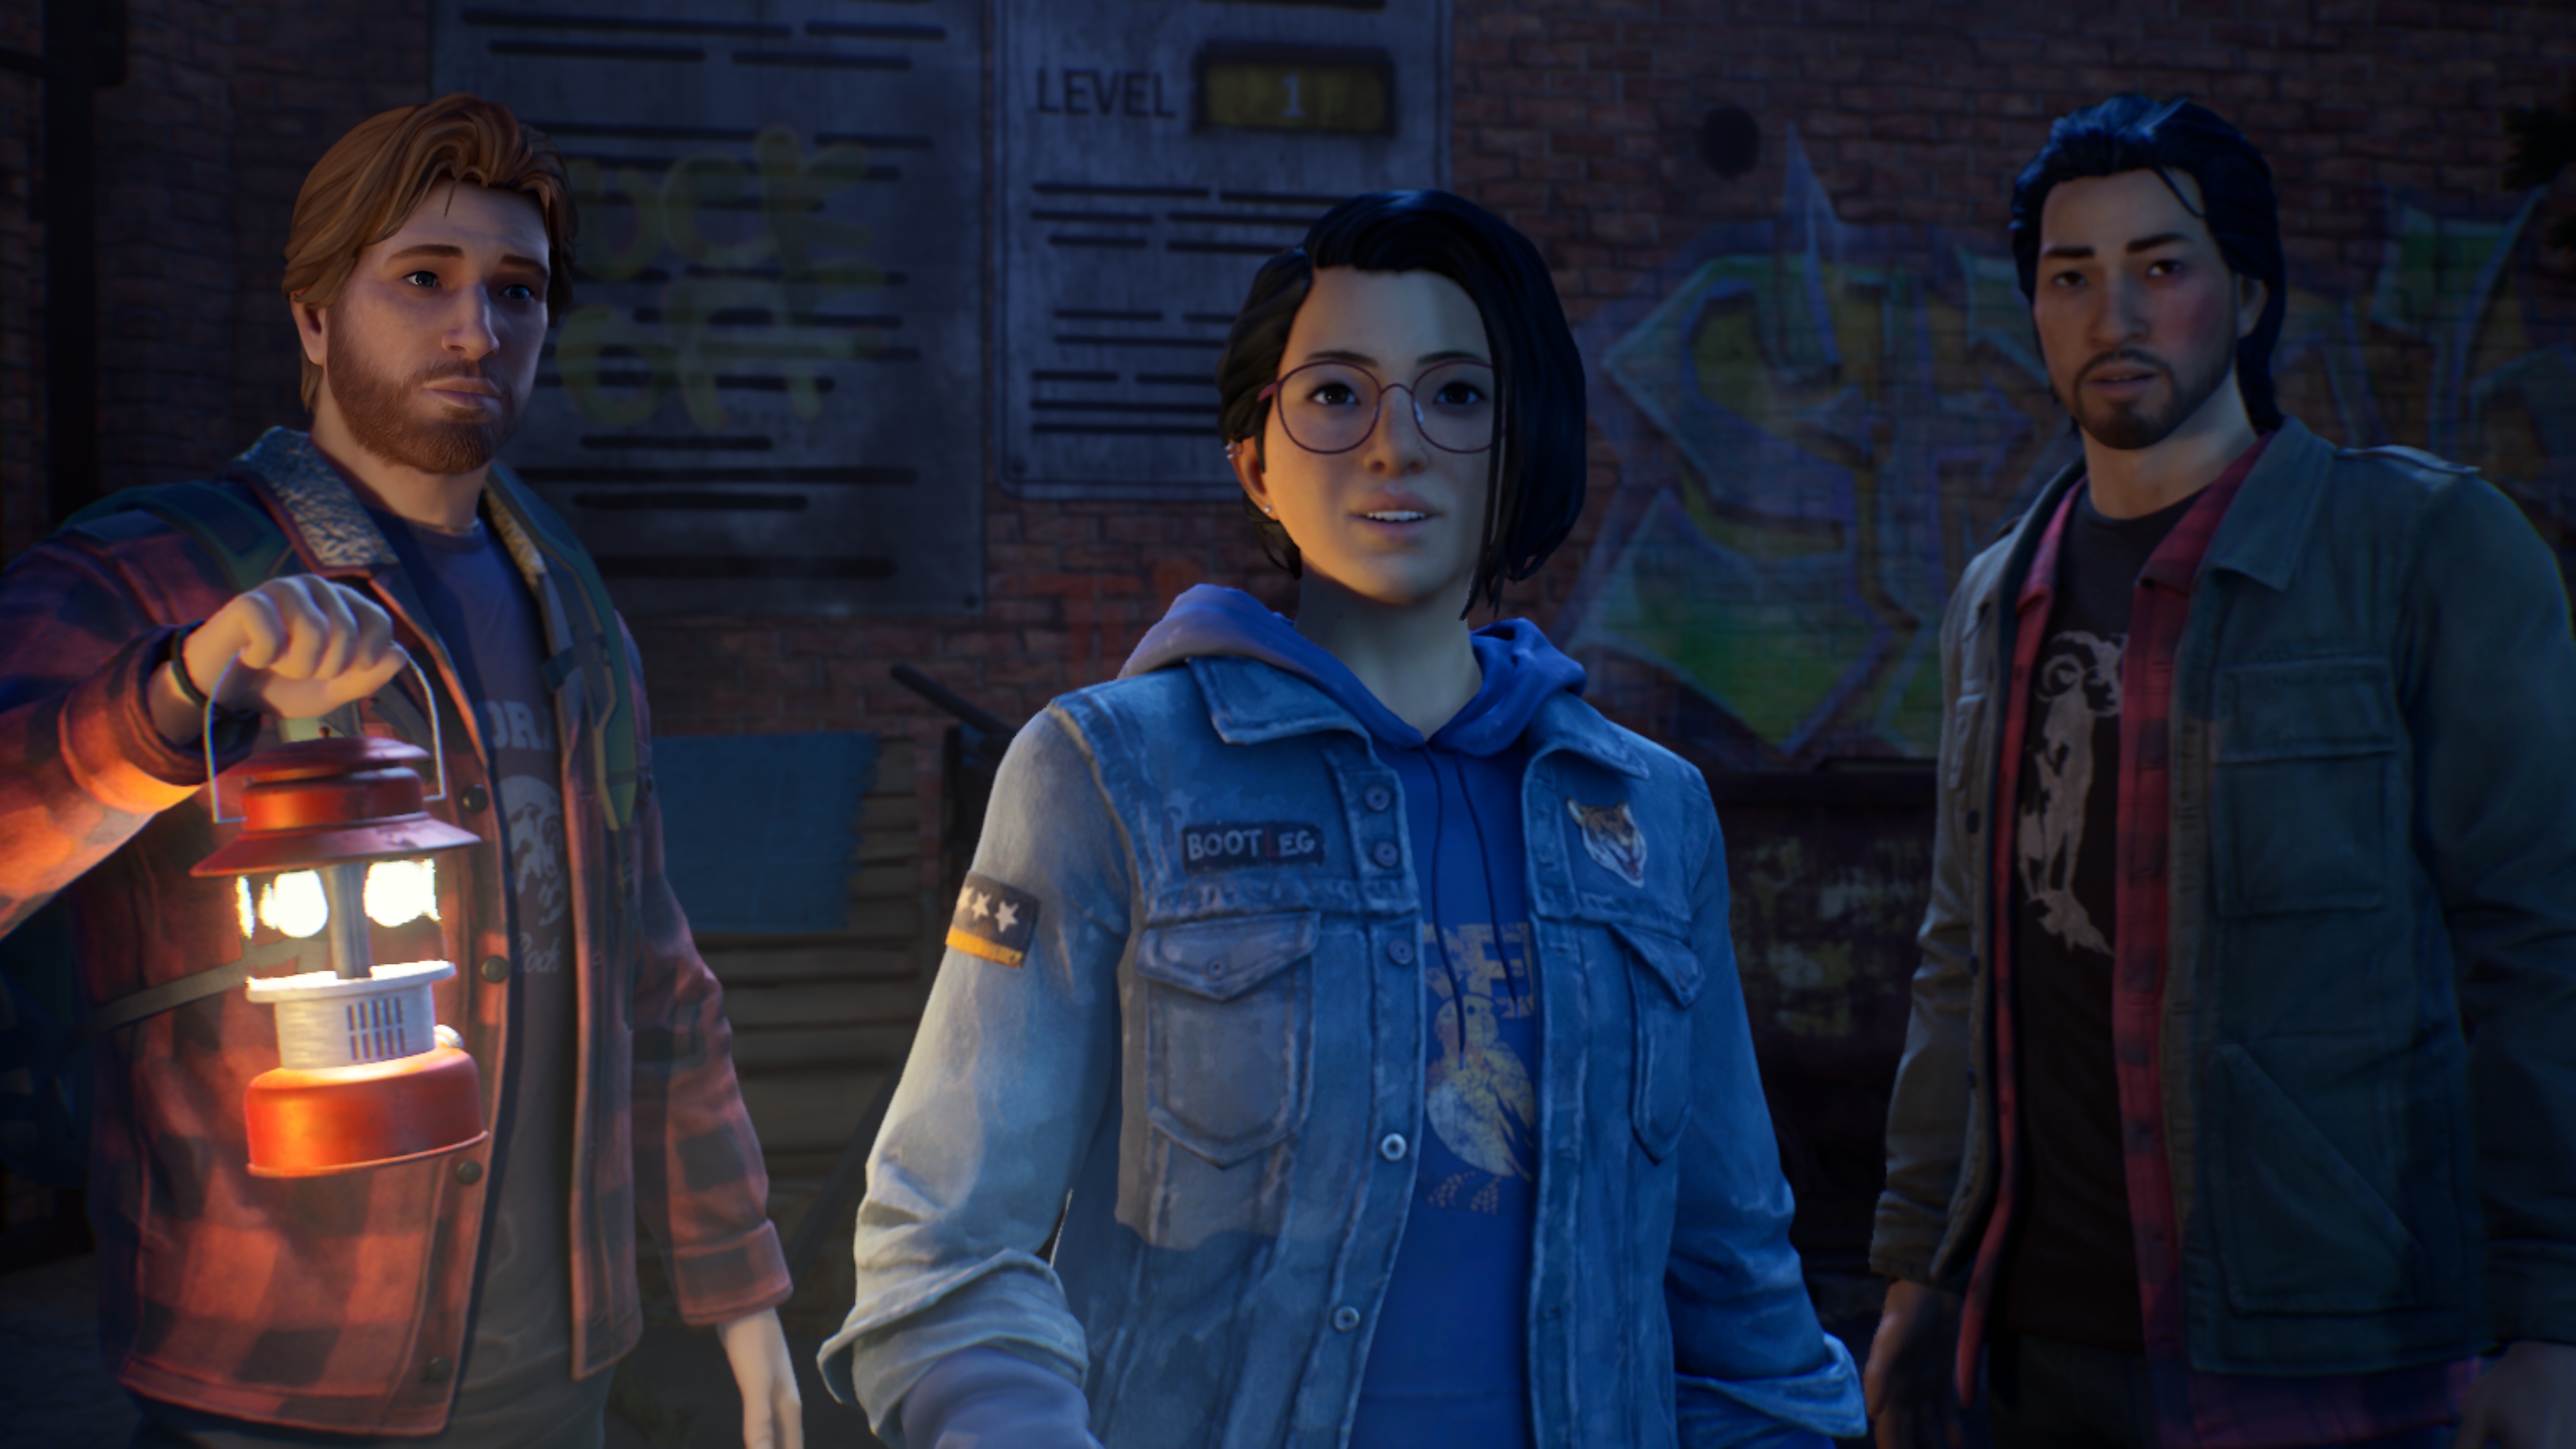 Life Is Strange True Colors screenshot showing three characters looking towards the camera